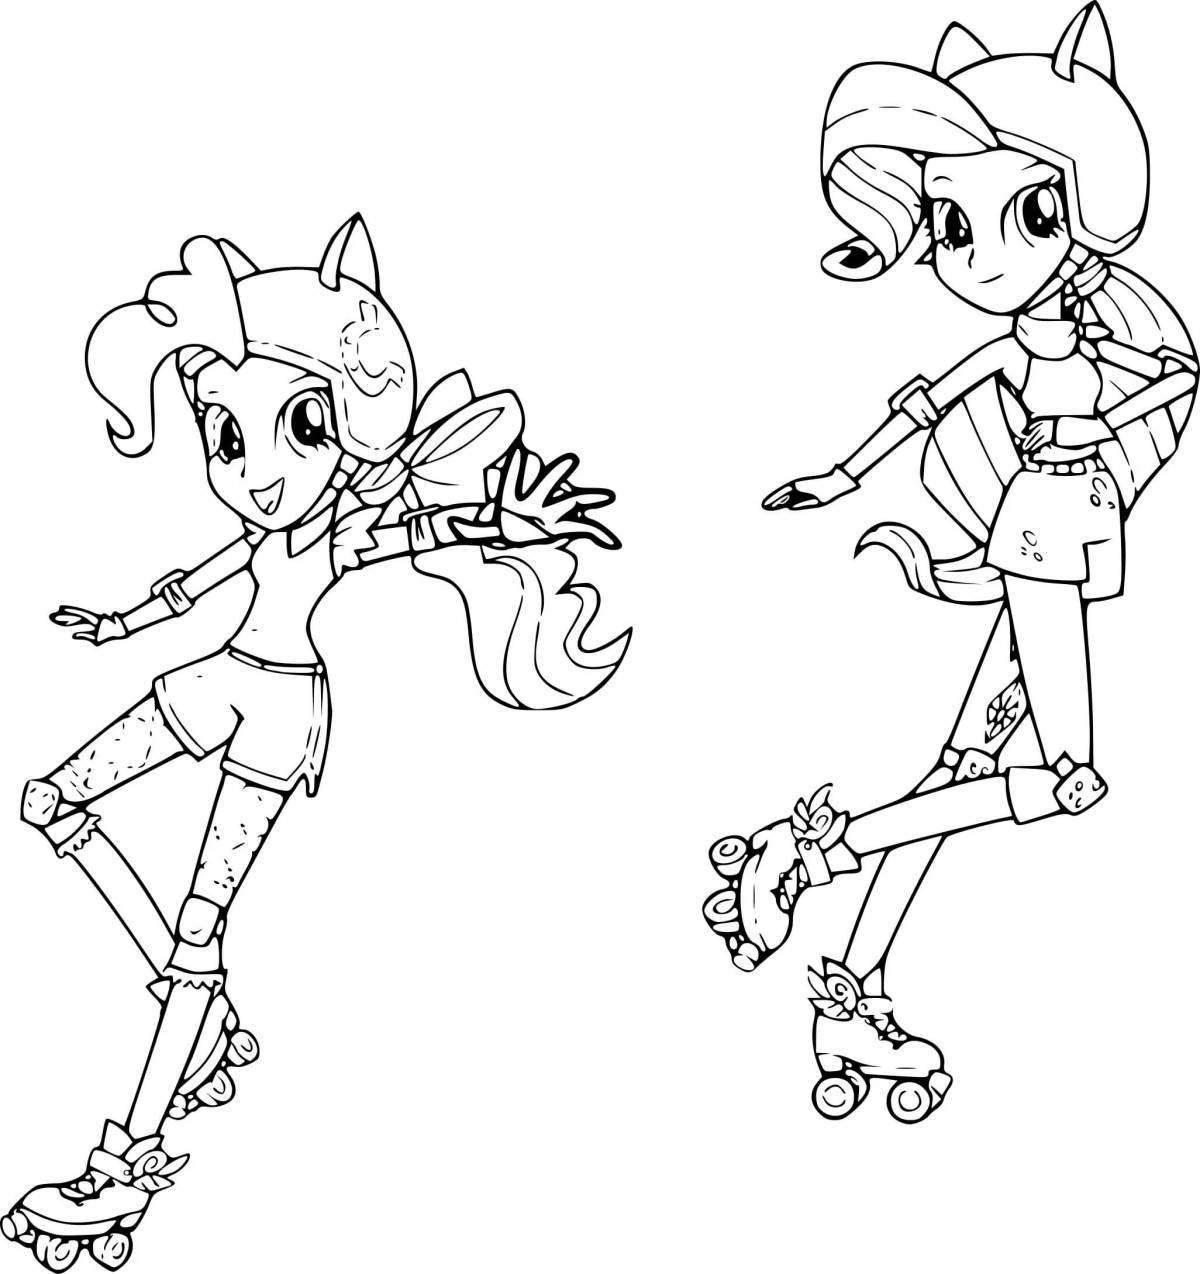 Coloring page adorable pinkie pie